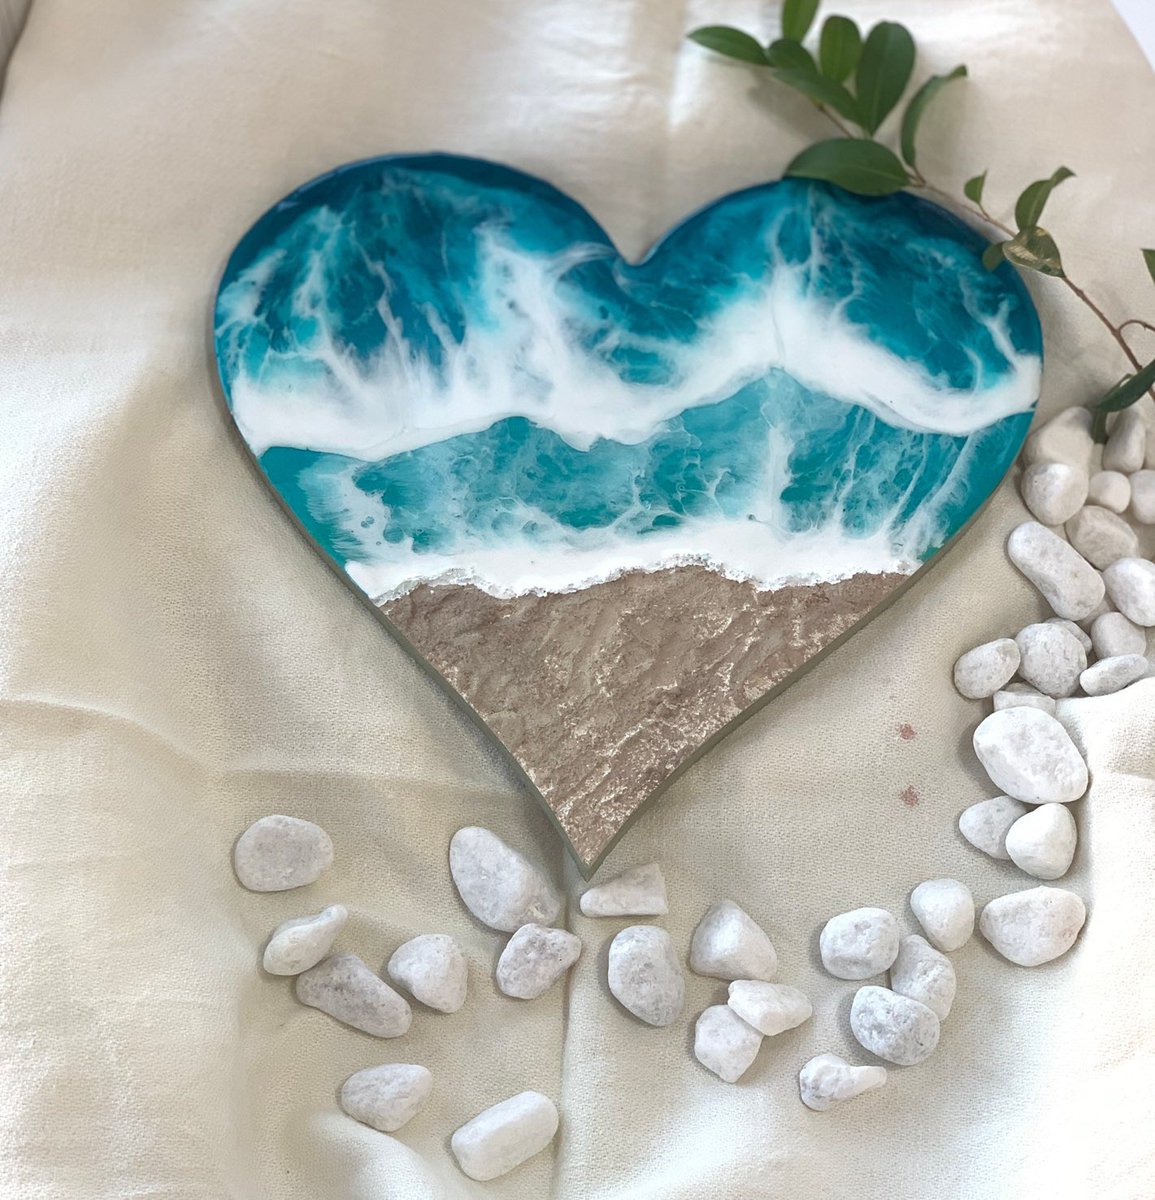 ¡Gracias por tus palabras! ★★★★★ 'WOW! This item is incredible. Just as pictured and described. It exceed expectations and was a wonderful gift to my ocean #sanvalentin #resinoceanwallart #househomedecor #customhomepainting #oceanlandscape etsy.me/3K9OSvB